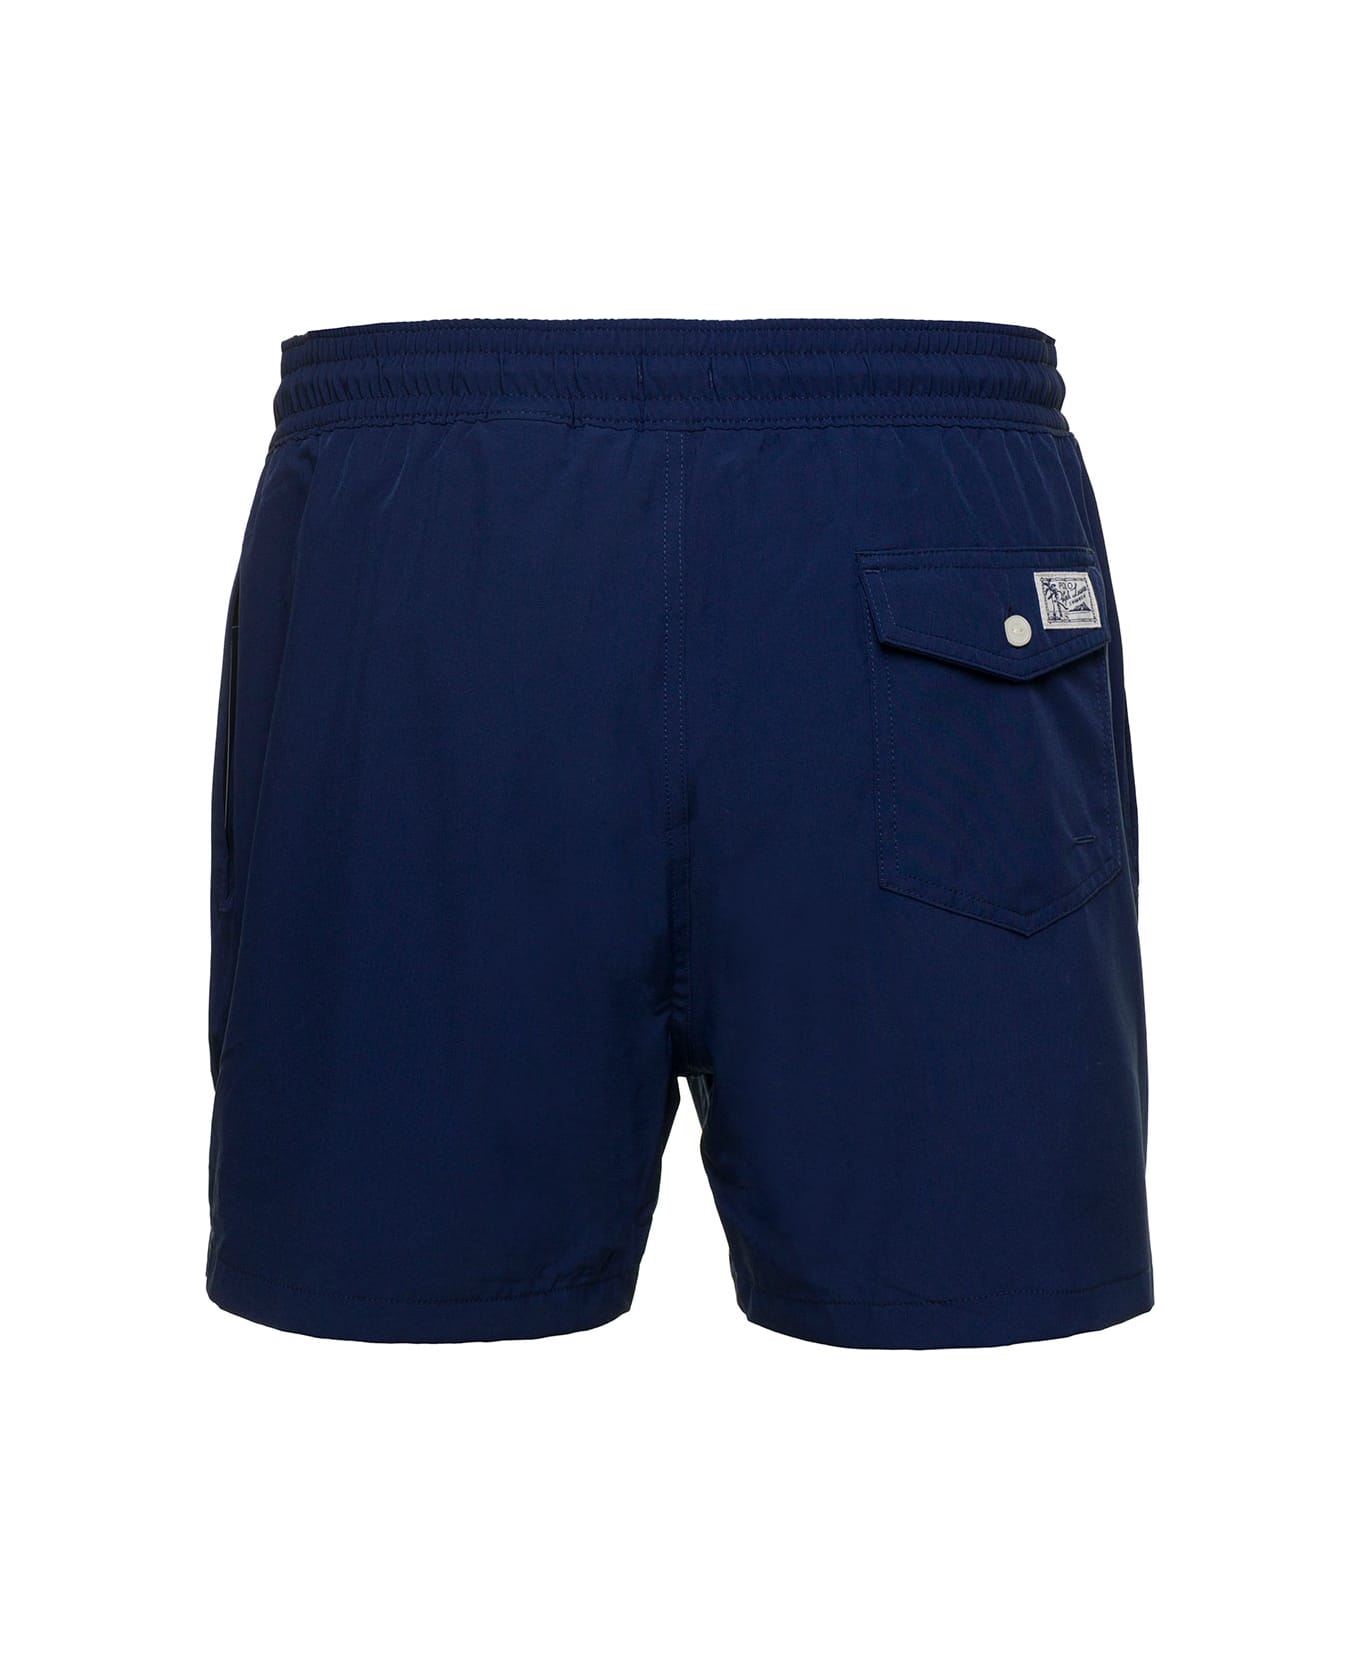 Ralph Lauren Blue Swim Trunks With Embroidered Logo And Logo Patch In Nylon Man - BLUE